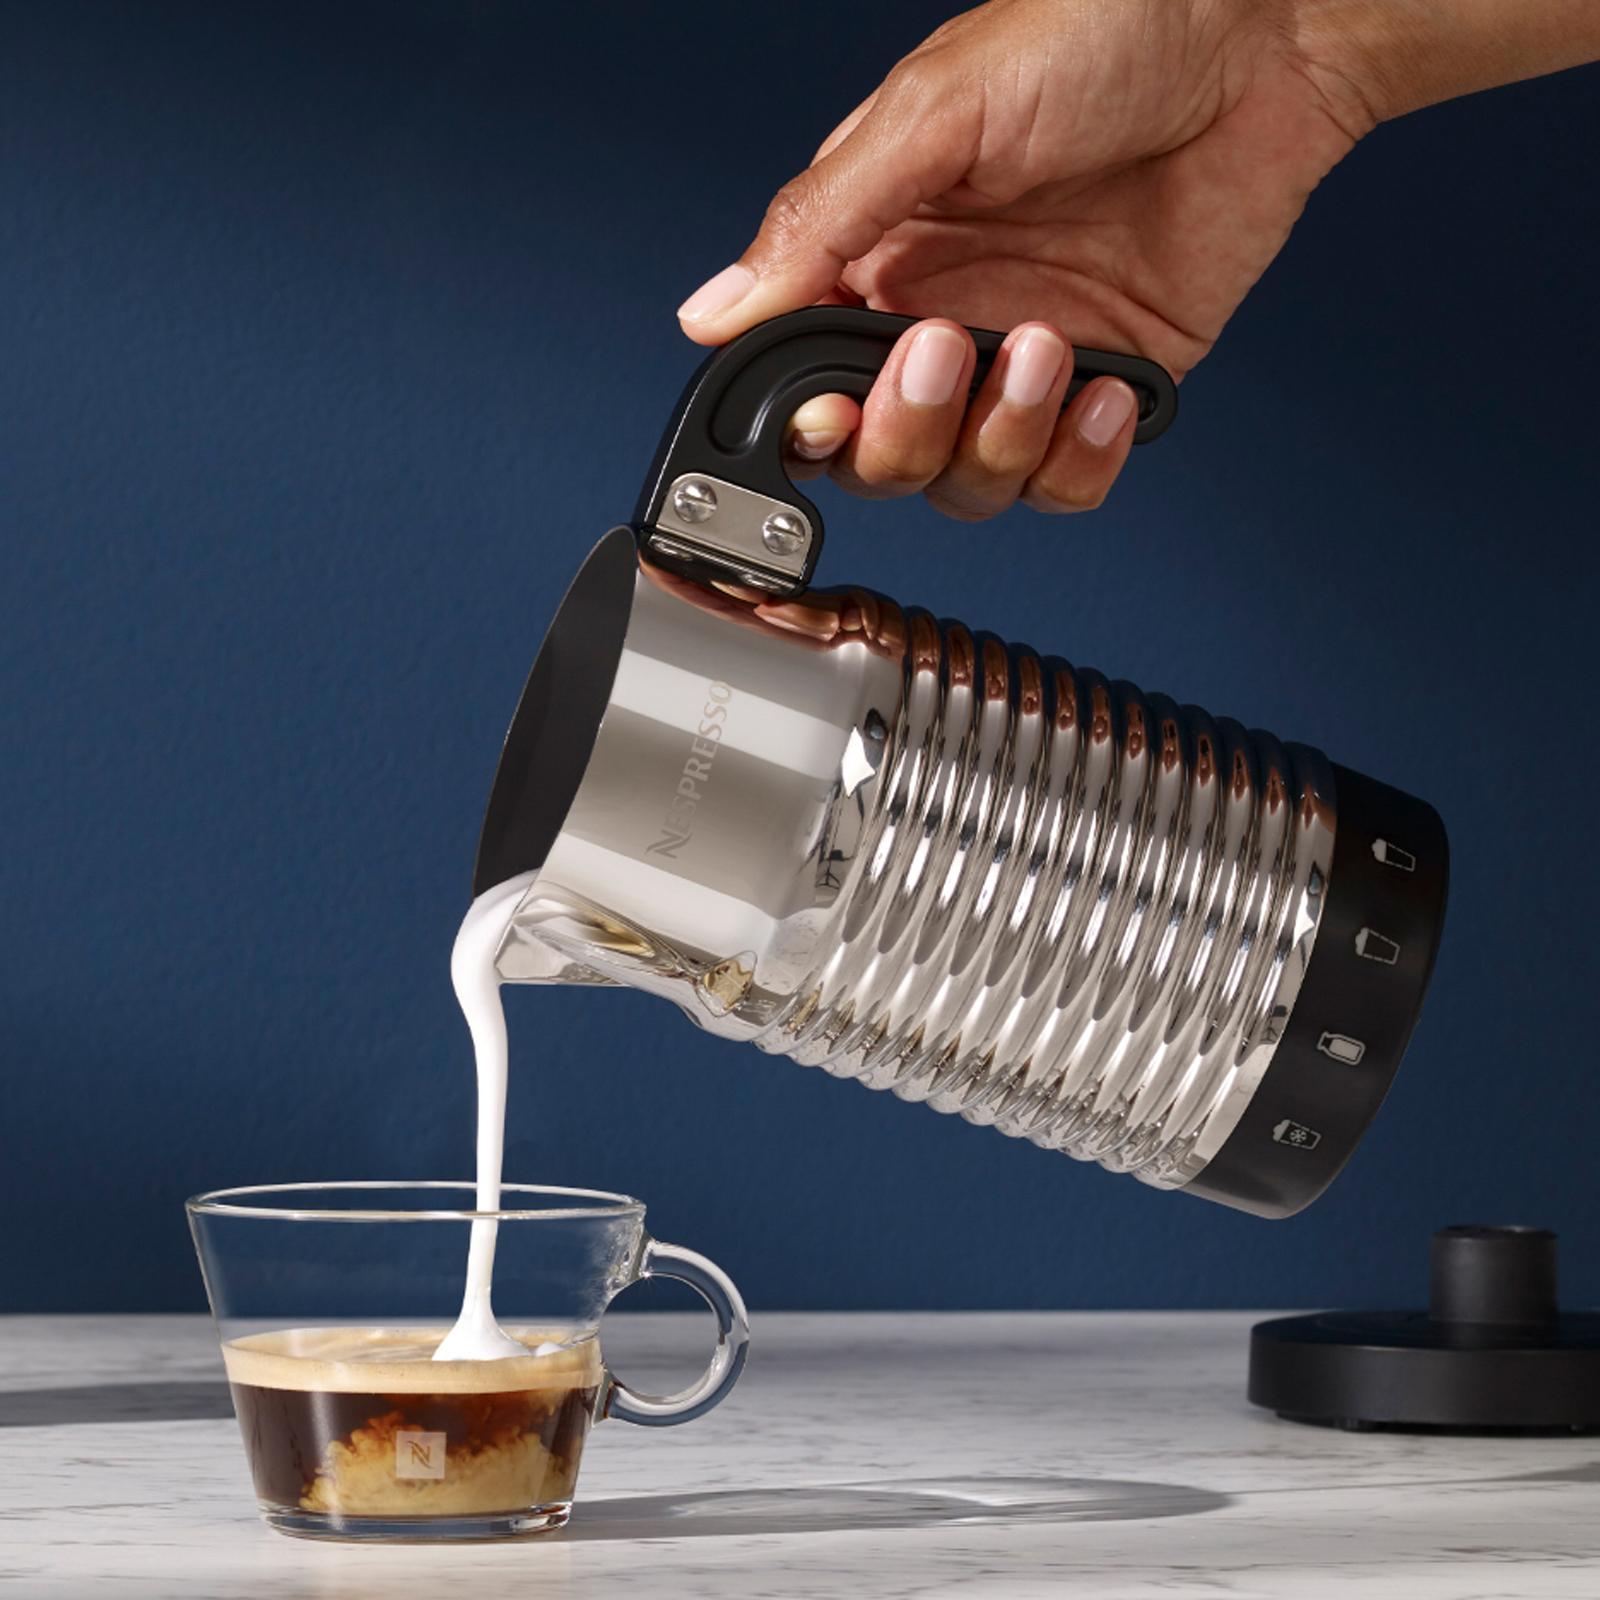 Review of Nespresso Aeroccino 4 Milk Frother for hot and cold frothy milk